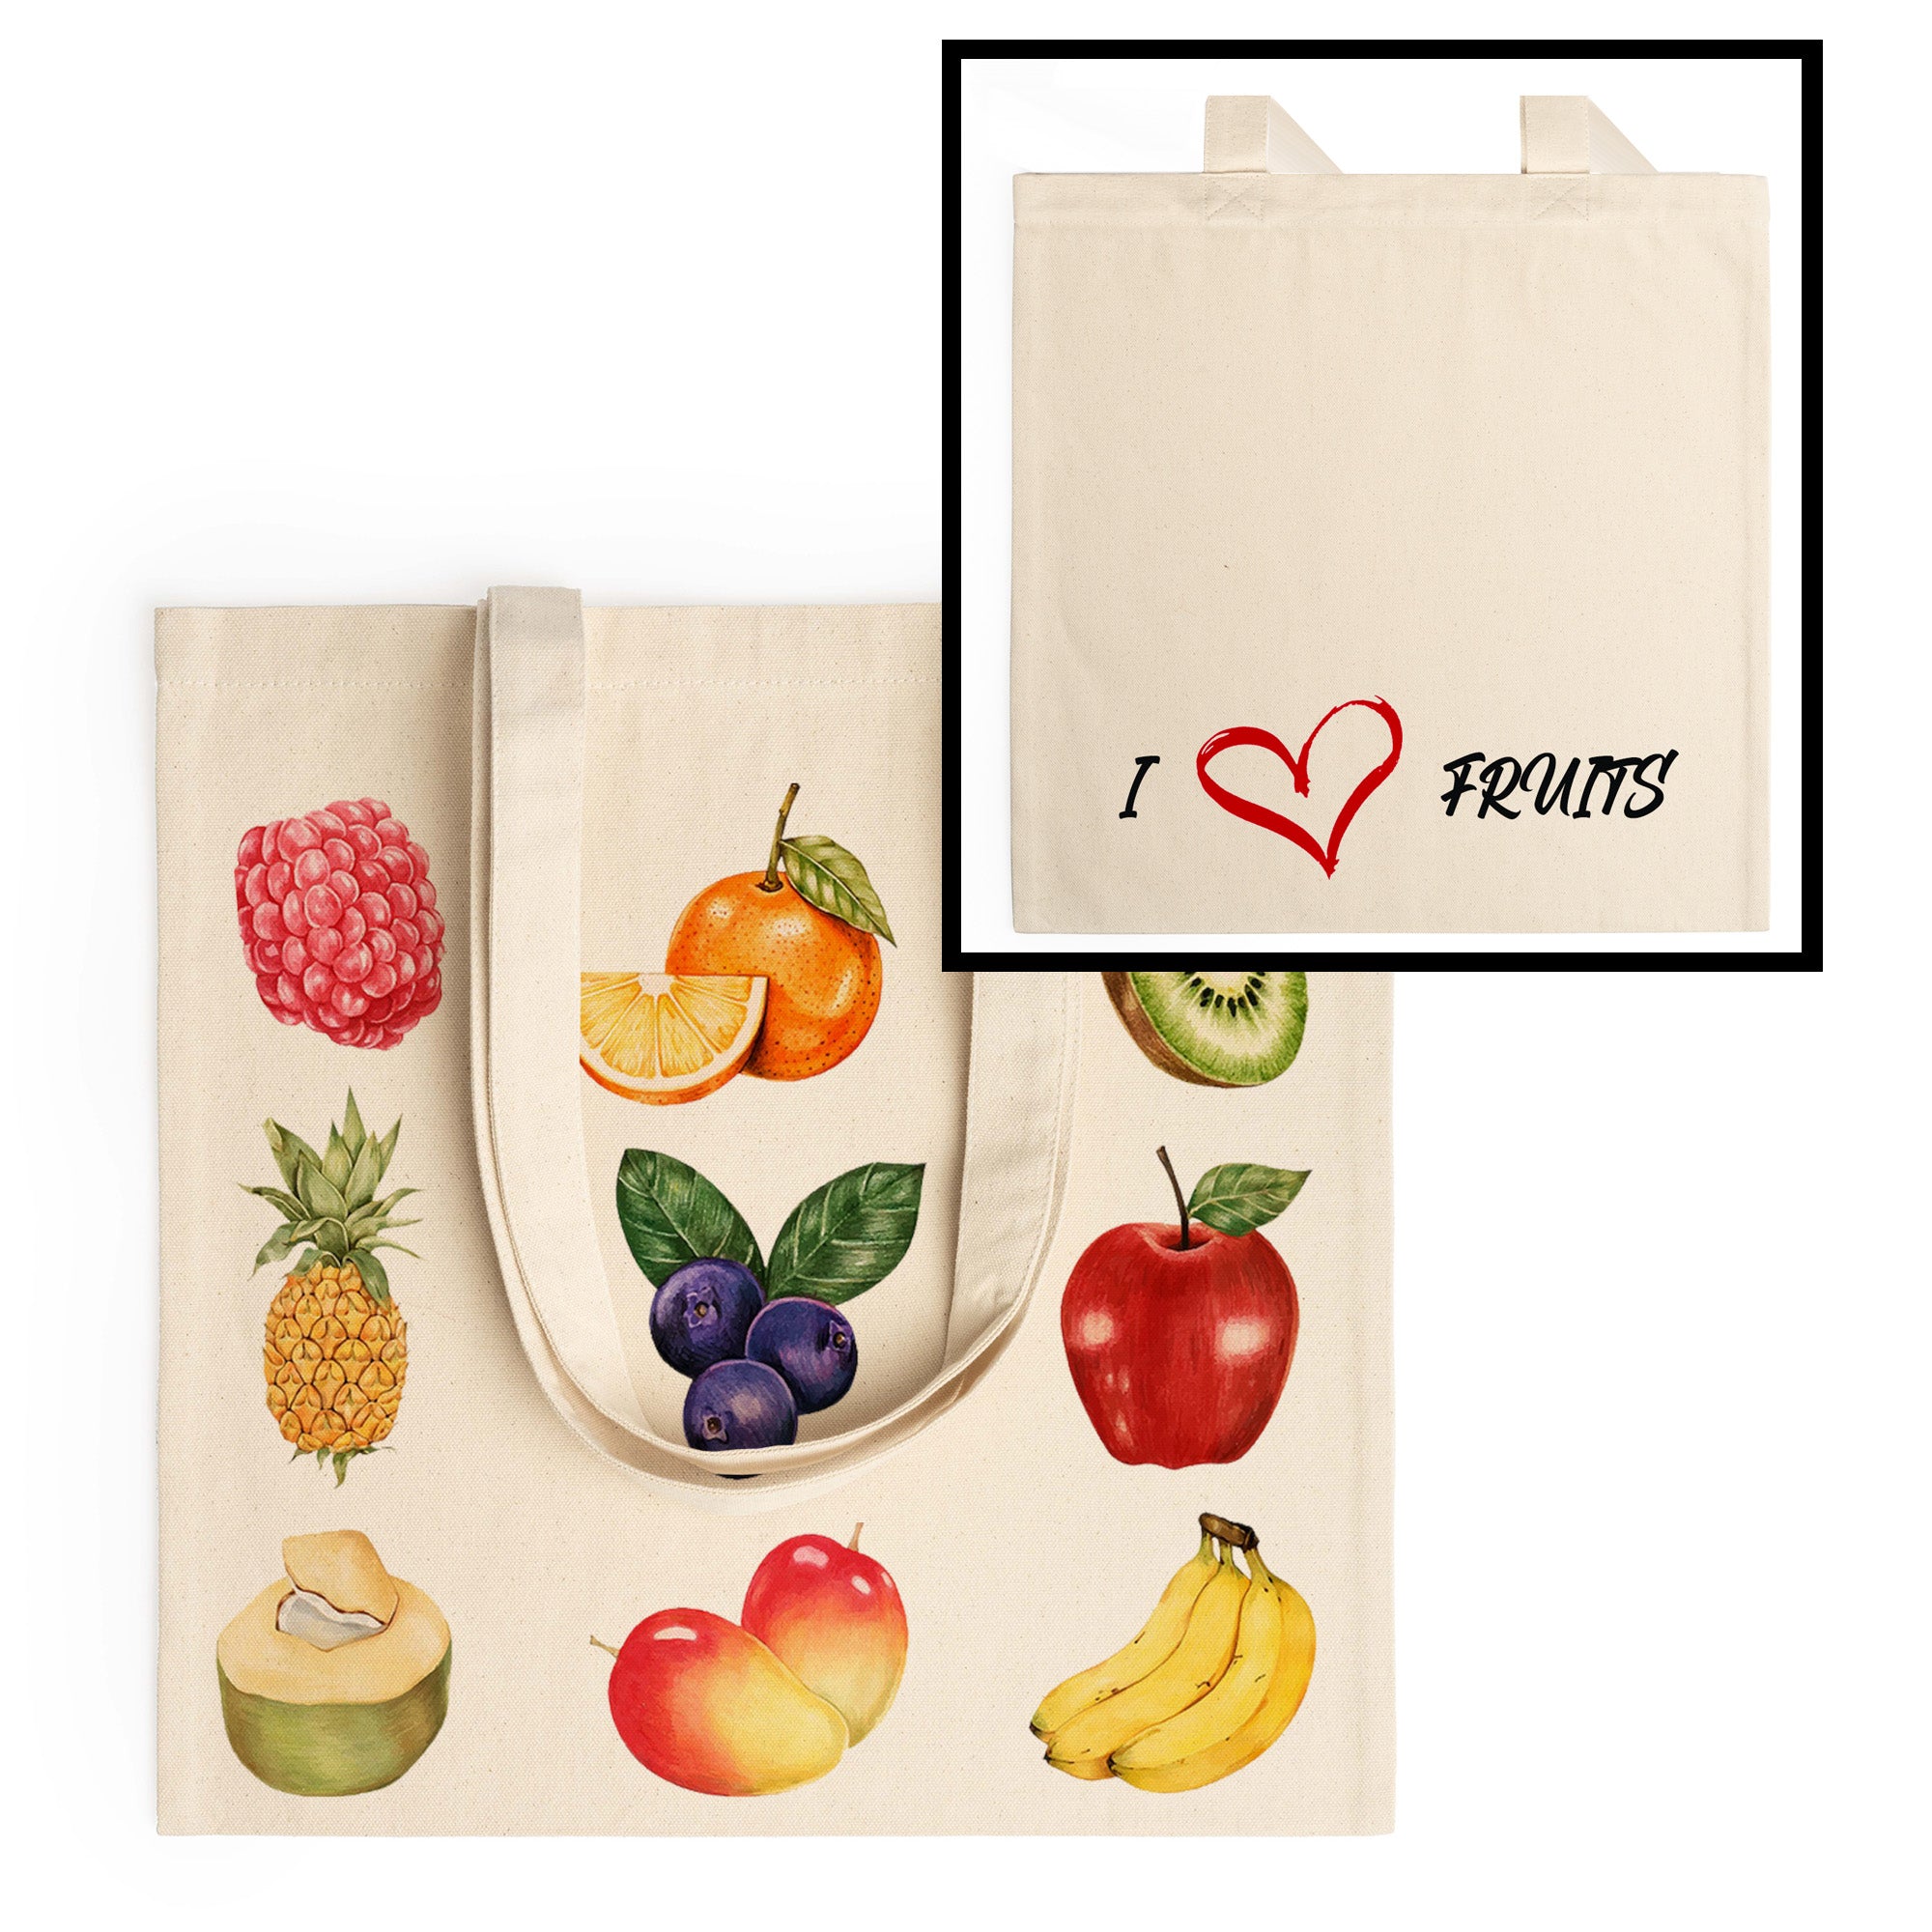 Organic Cotton Bag · Very thick · 300 GSM · Customizable on 2 sides · Ref BO7167